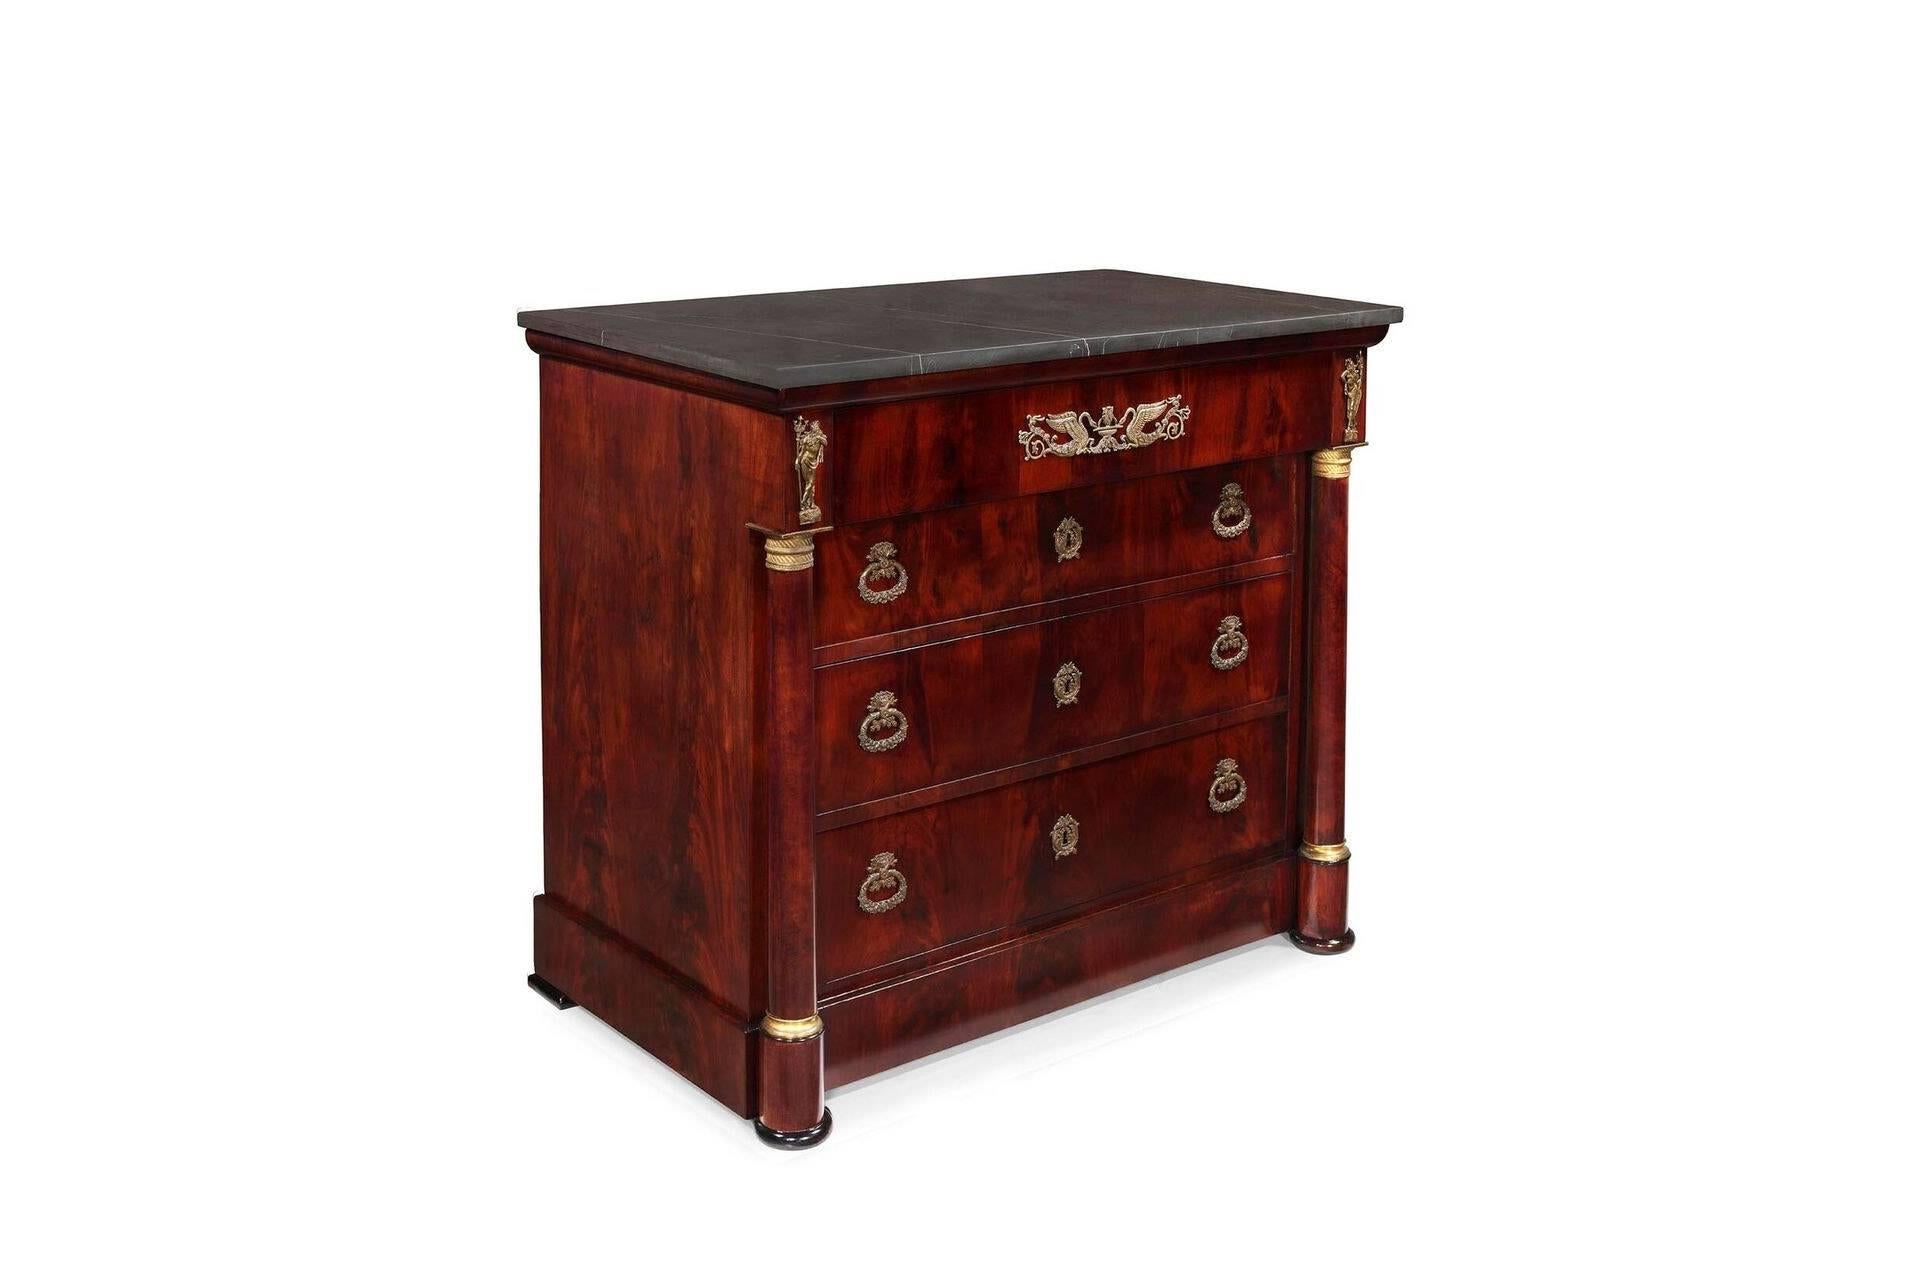 Beautifully proportioned French Empire chest of drawers with decorative cast bronze and marble top.
         